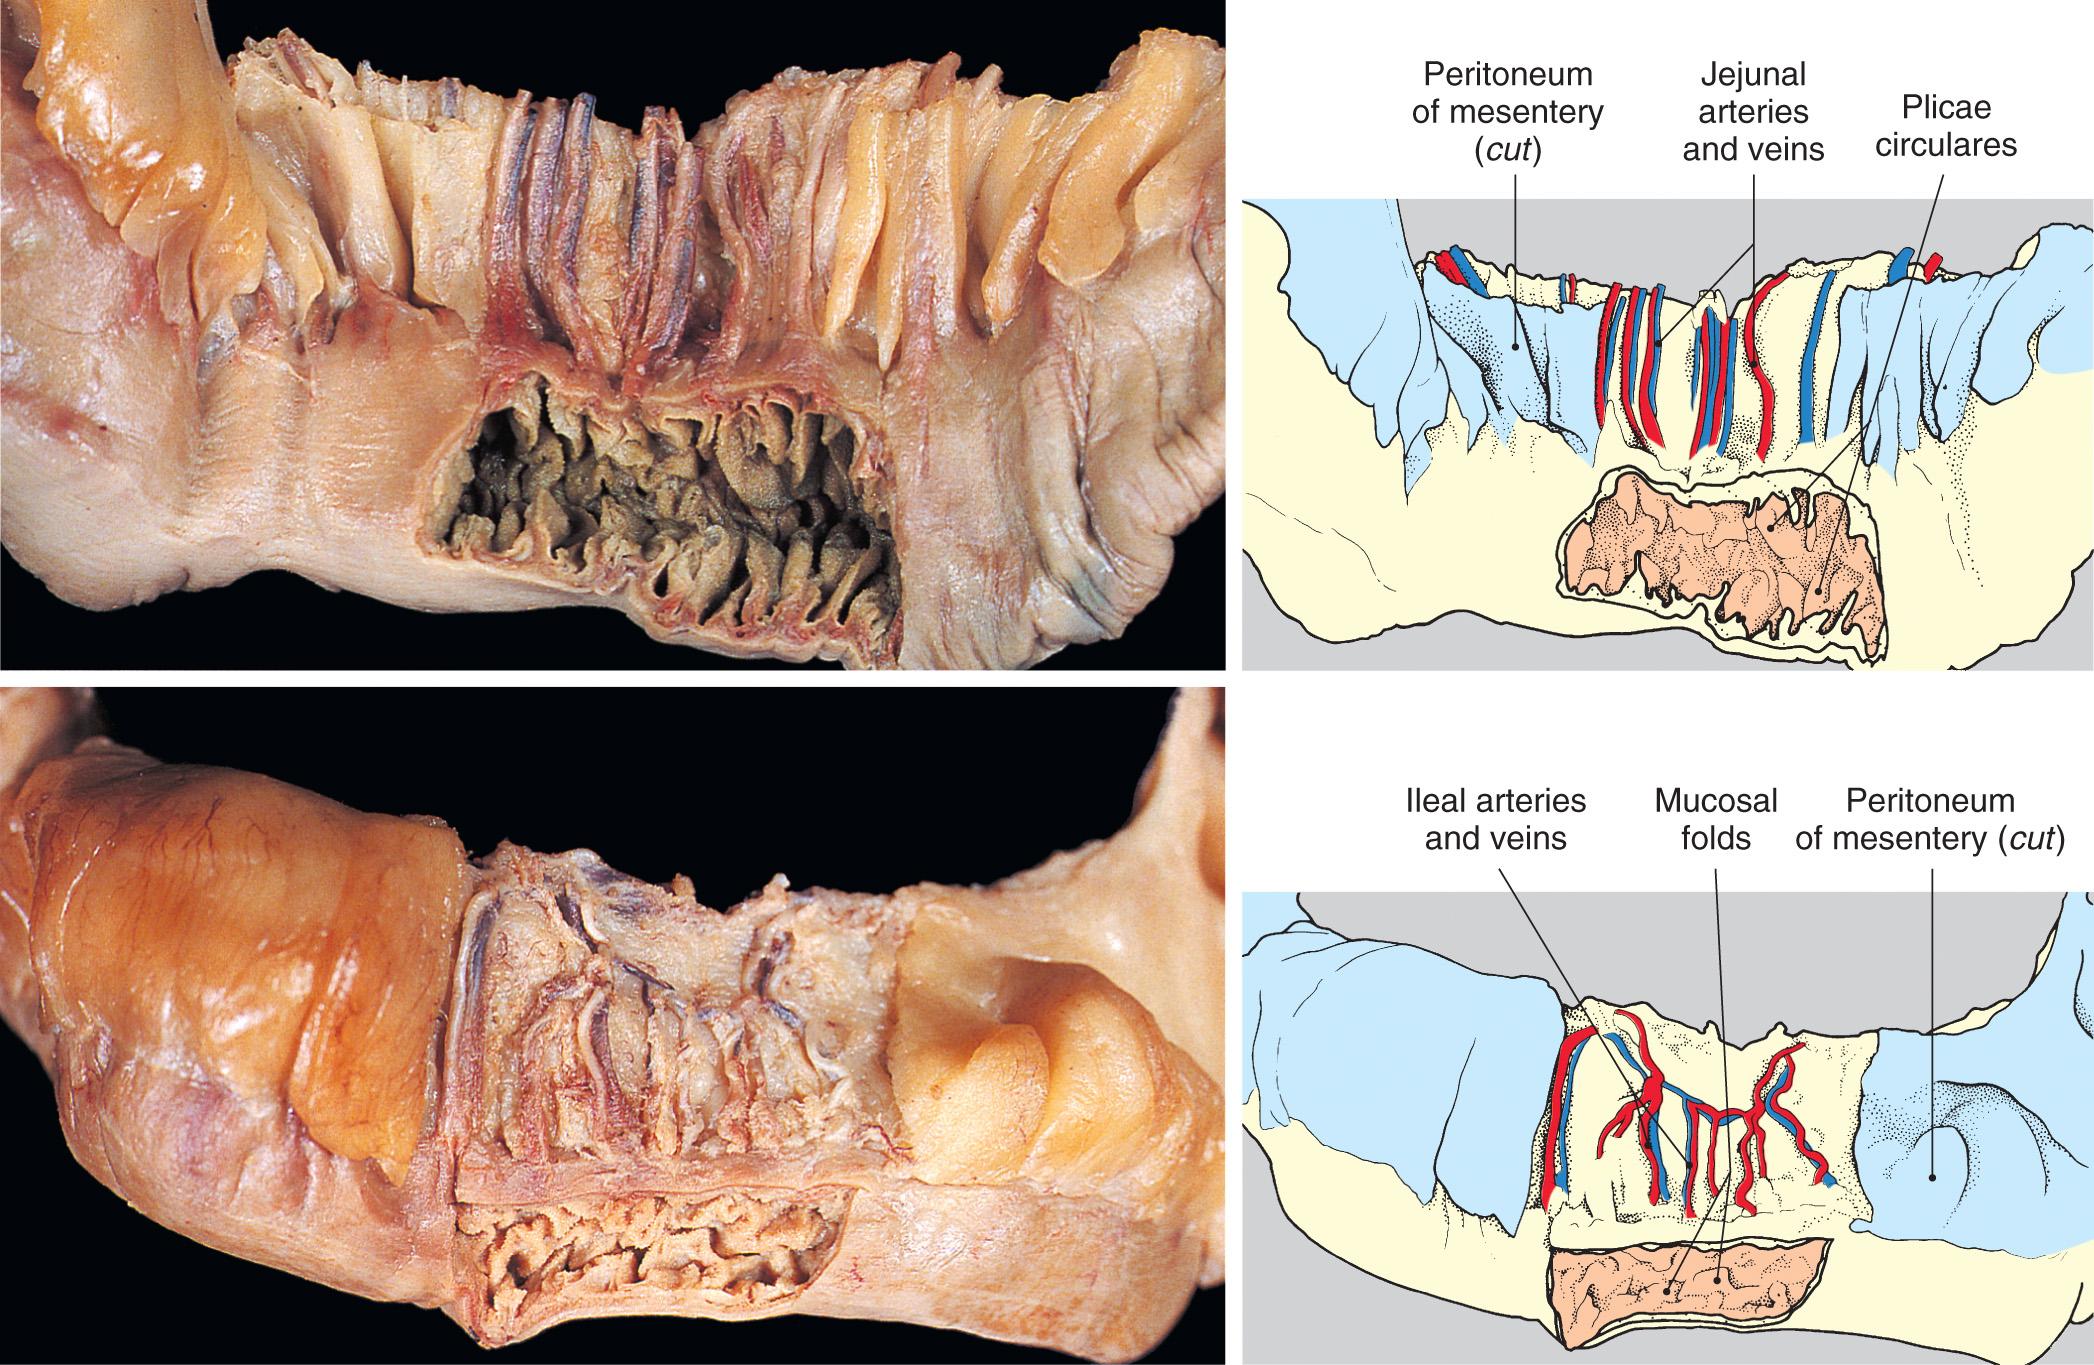 FIGURE 71.8, Plicae circulares are transverse folds of mucosa and submucosa that aid in absorption. These folds are deep and are visible on gross inspection.